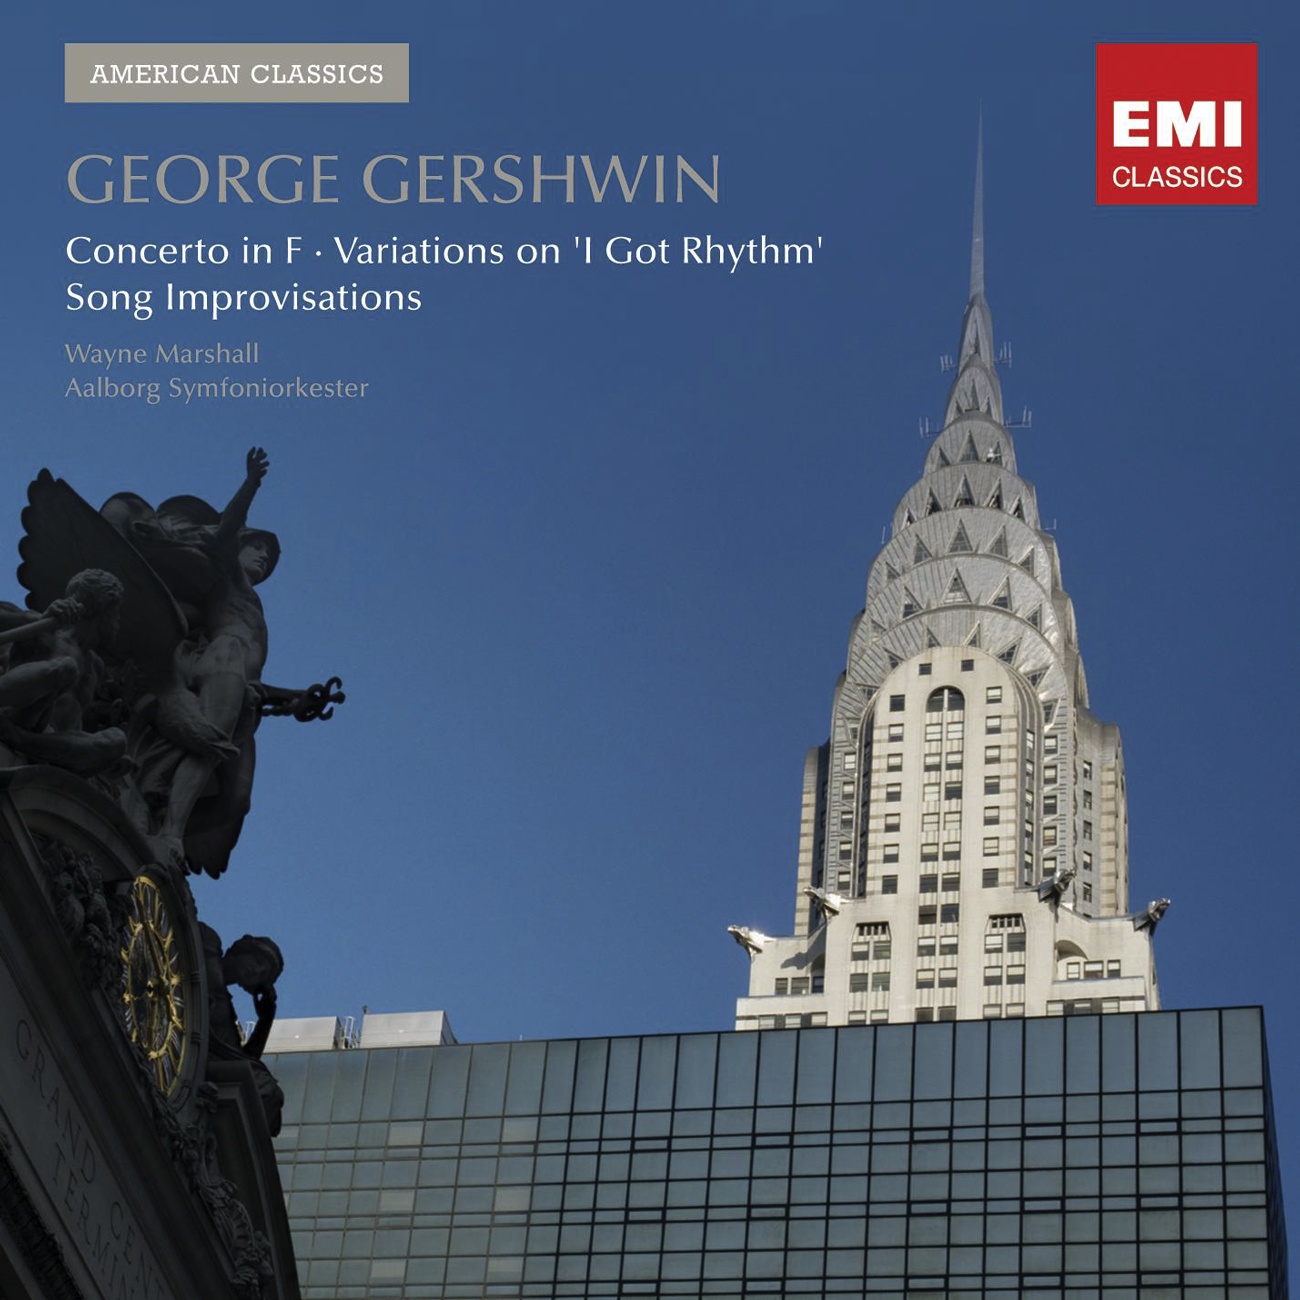 A Gershwin Songbook: improvisations on songs by George Gershwin: Summertime (Porgy & Bess)